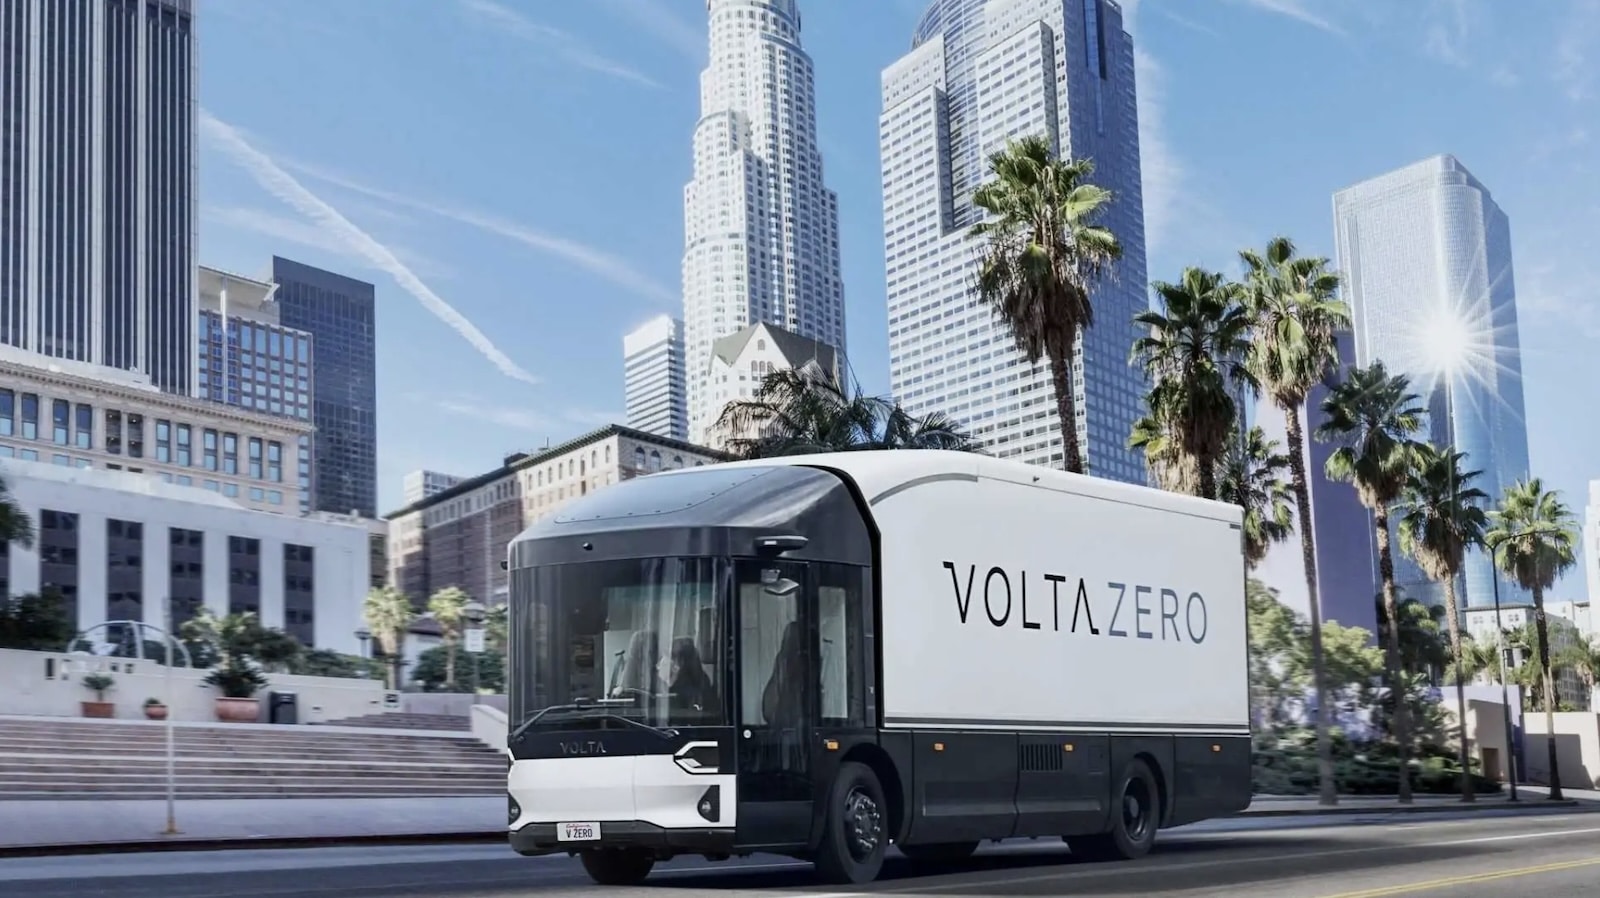 Electric Truck Sensation, Volta Trucks, Finds Itself On Rocky Terrain. The Company, A Household Name For Electric Vehicle Enthusiasts, Recently Declared Bankruptcy And Is Now On A Frenzied Search For A Potential Buyer To Lift It From The Crisis.